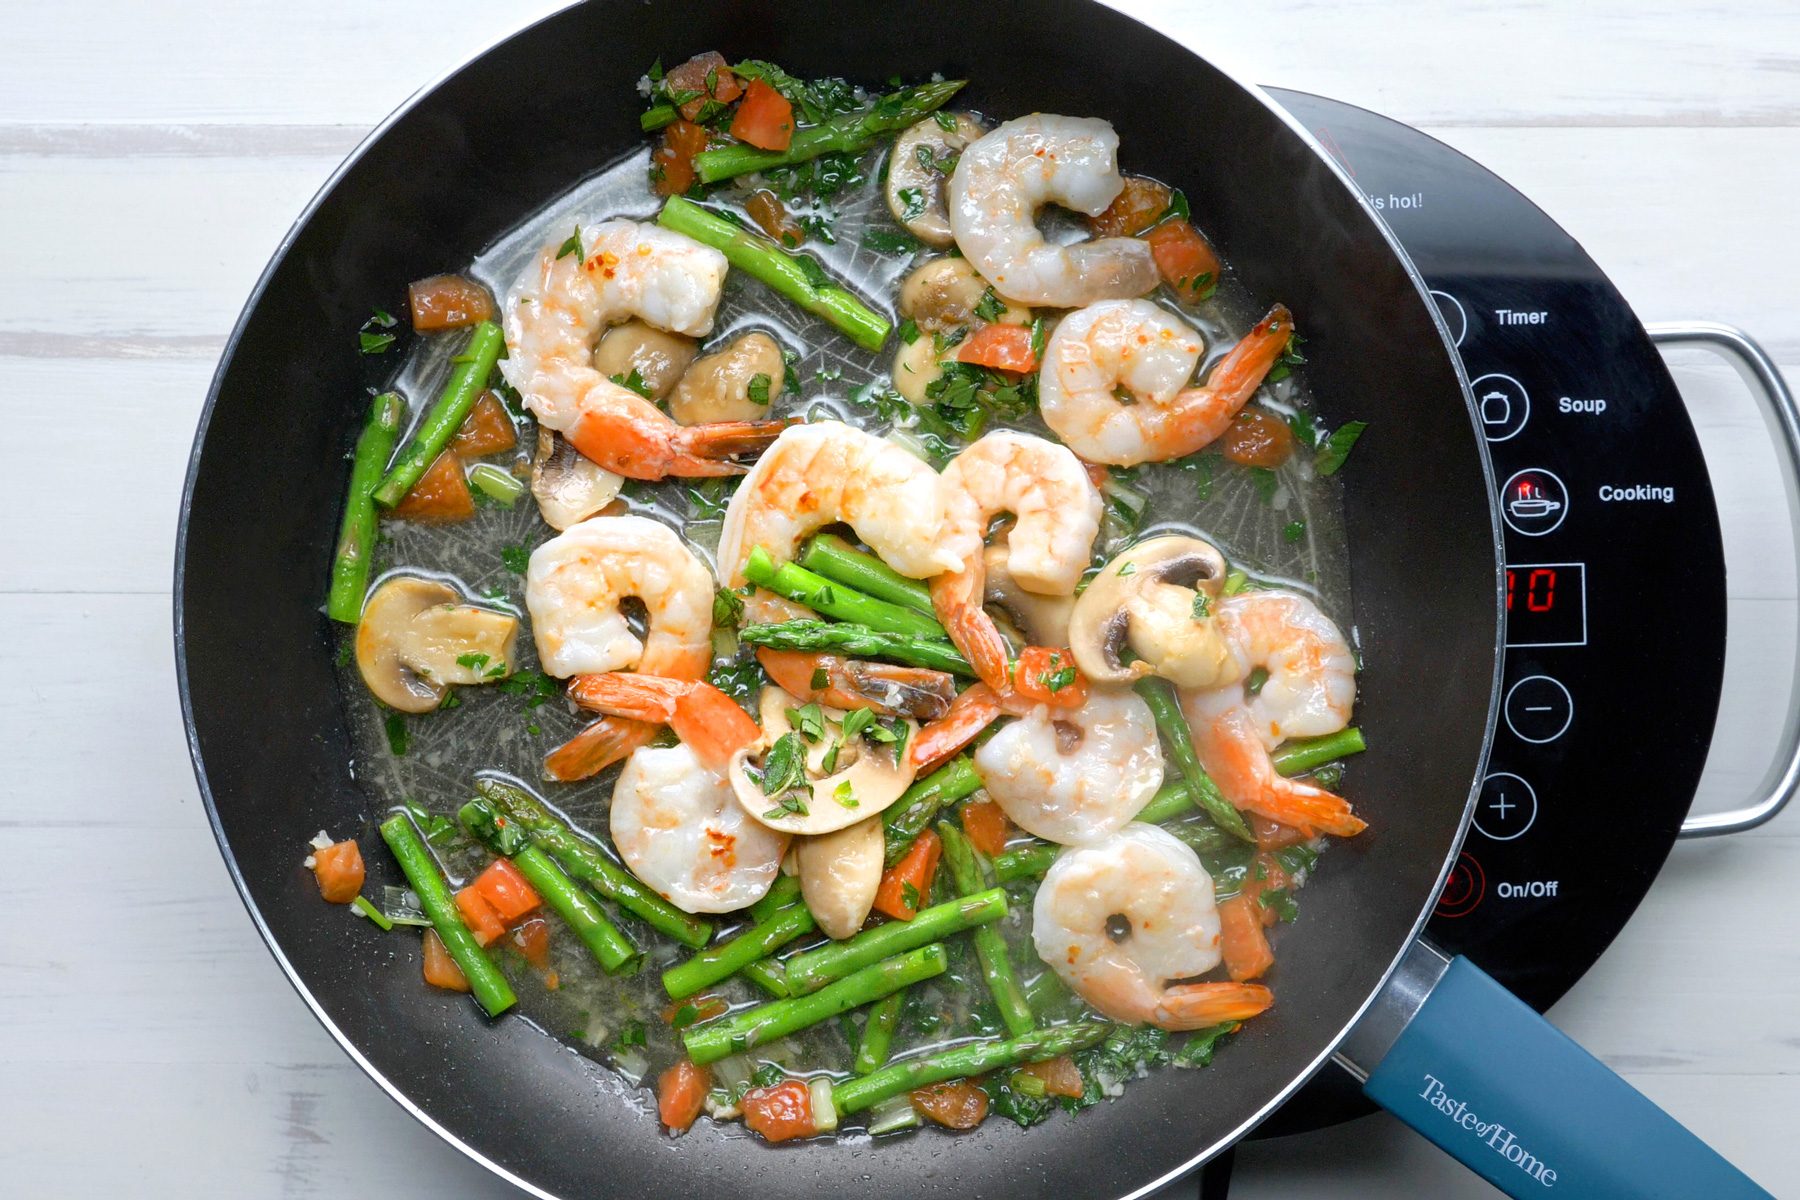 Asparagus, mushrooms, tomatoes, garlic, and onions cooking with shrimps in a small skillet